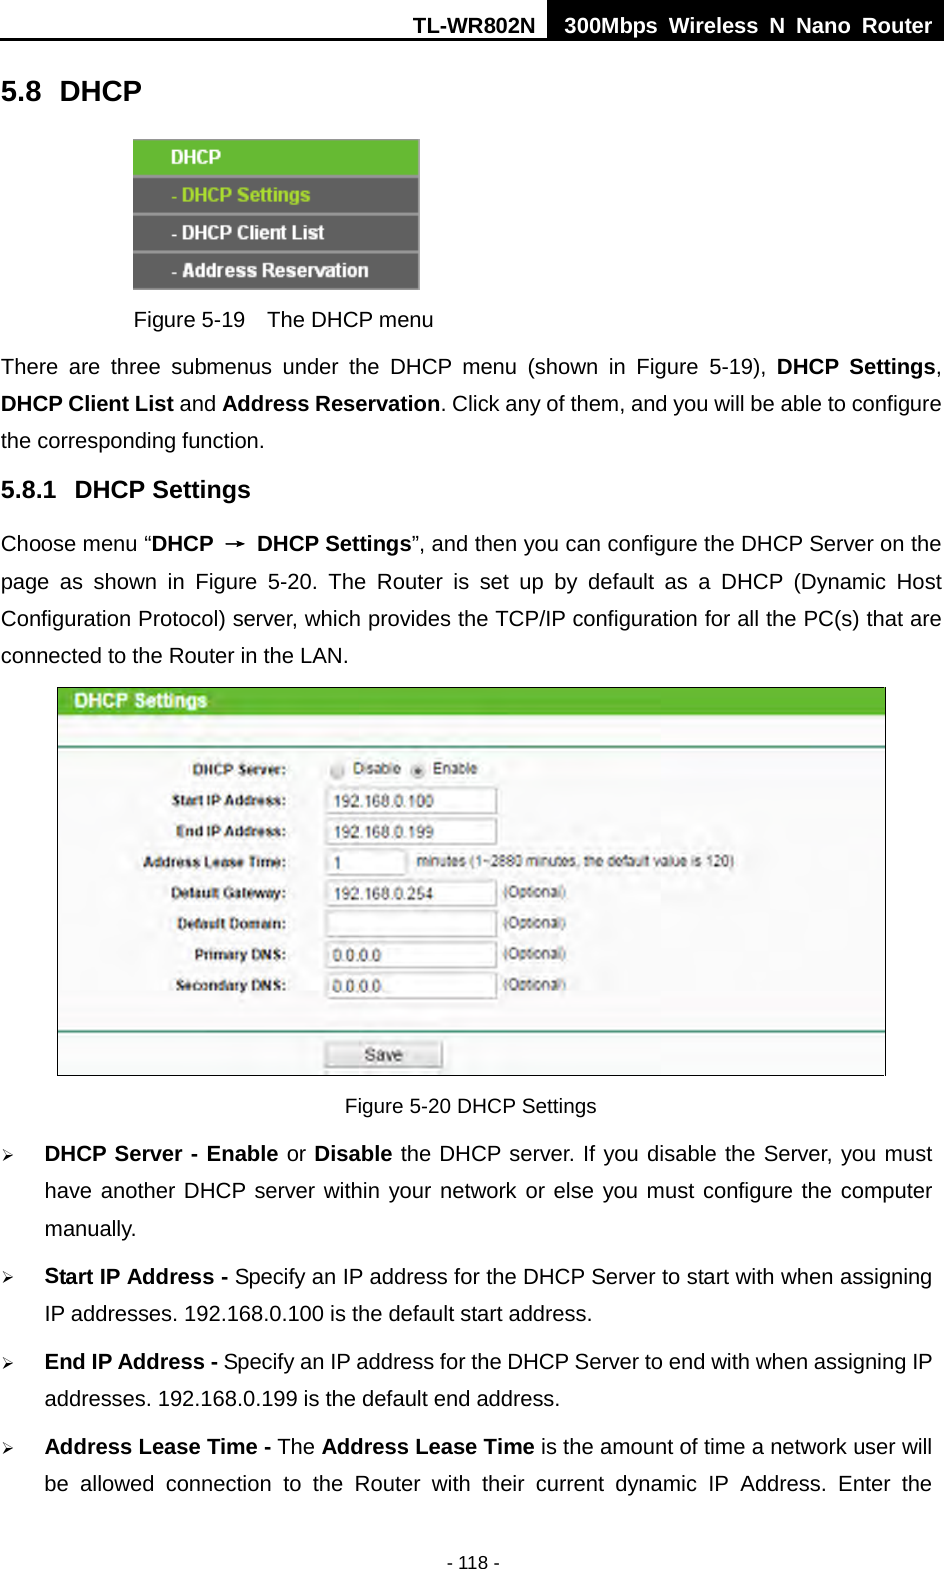 TL-WR802N  300Mbps Wireless N Nano Router  5.8 DHCP  Figure 5-19  The DHCP menu There are three submenus under the DHCP menu (shown in Figure  5-19),  DHCP Settings, DHCP Client List and Address Reservation. Click any of them, and you will be able to configure the corresponding function. 5.8.1 DHCP Settings Choose menu “DHCP  → DHCP Settings”, and then you can configure the DHCP Server on the page  as  shown in Figure  5-20.  The  Router is set up by default as a DHCP (Dynamic Host Configuration Protocol) server, which provides the TCP/IP configuration for all the PC(s) that are connected to the Router in the LAN.    Figure 5-20 DHCP Settings  DHCP Server - Enable or Disable the DHCP server. If you disable the Server, you must have another DHCP server within your network or else you must configure the computer manually.  Start IP Address - Specify an IP address for the DHCP Server to start with when assigning IP addresses. 192.168.0.100 is the default start address.  End IP Address - Specify an IP address for the DHCP Server to end with when assigning IP addresses. 192.168.0.199 is the default end address.  Address Lease Time - The Address Lease Time is the amount of time a network user will be allowed connection to the Router with their current dynamic IP Address. Enter the - 118 - 